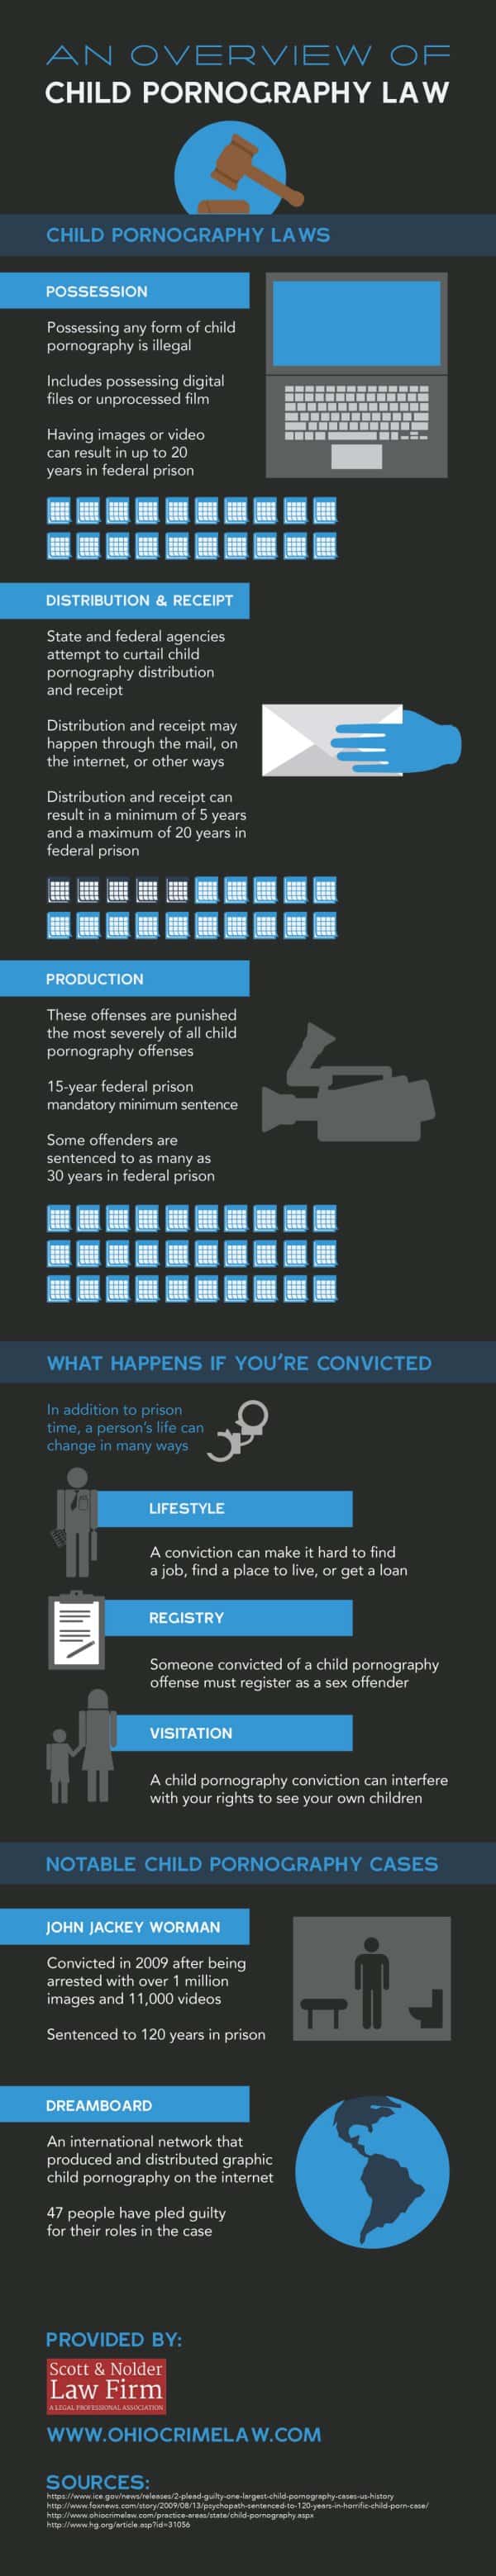 Illegal Pornography - An Overview of Child Pornography Law [Infographic]